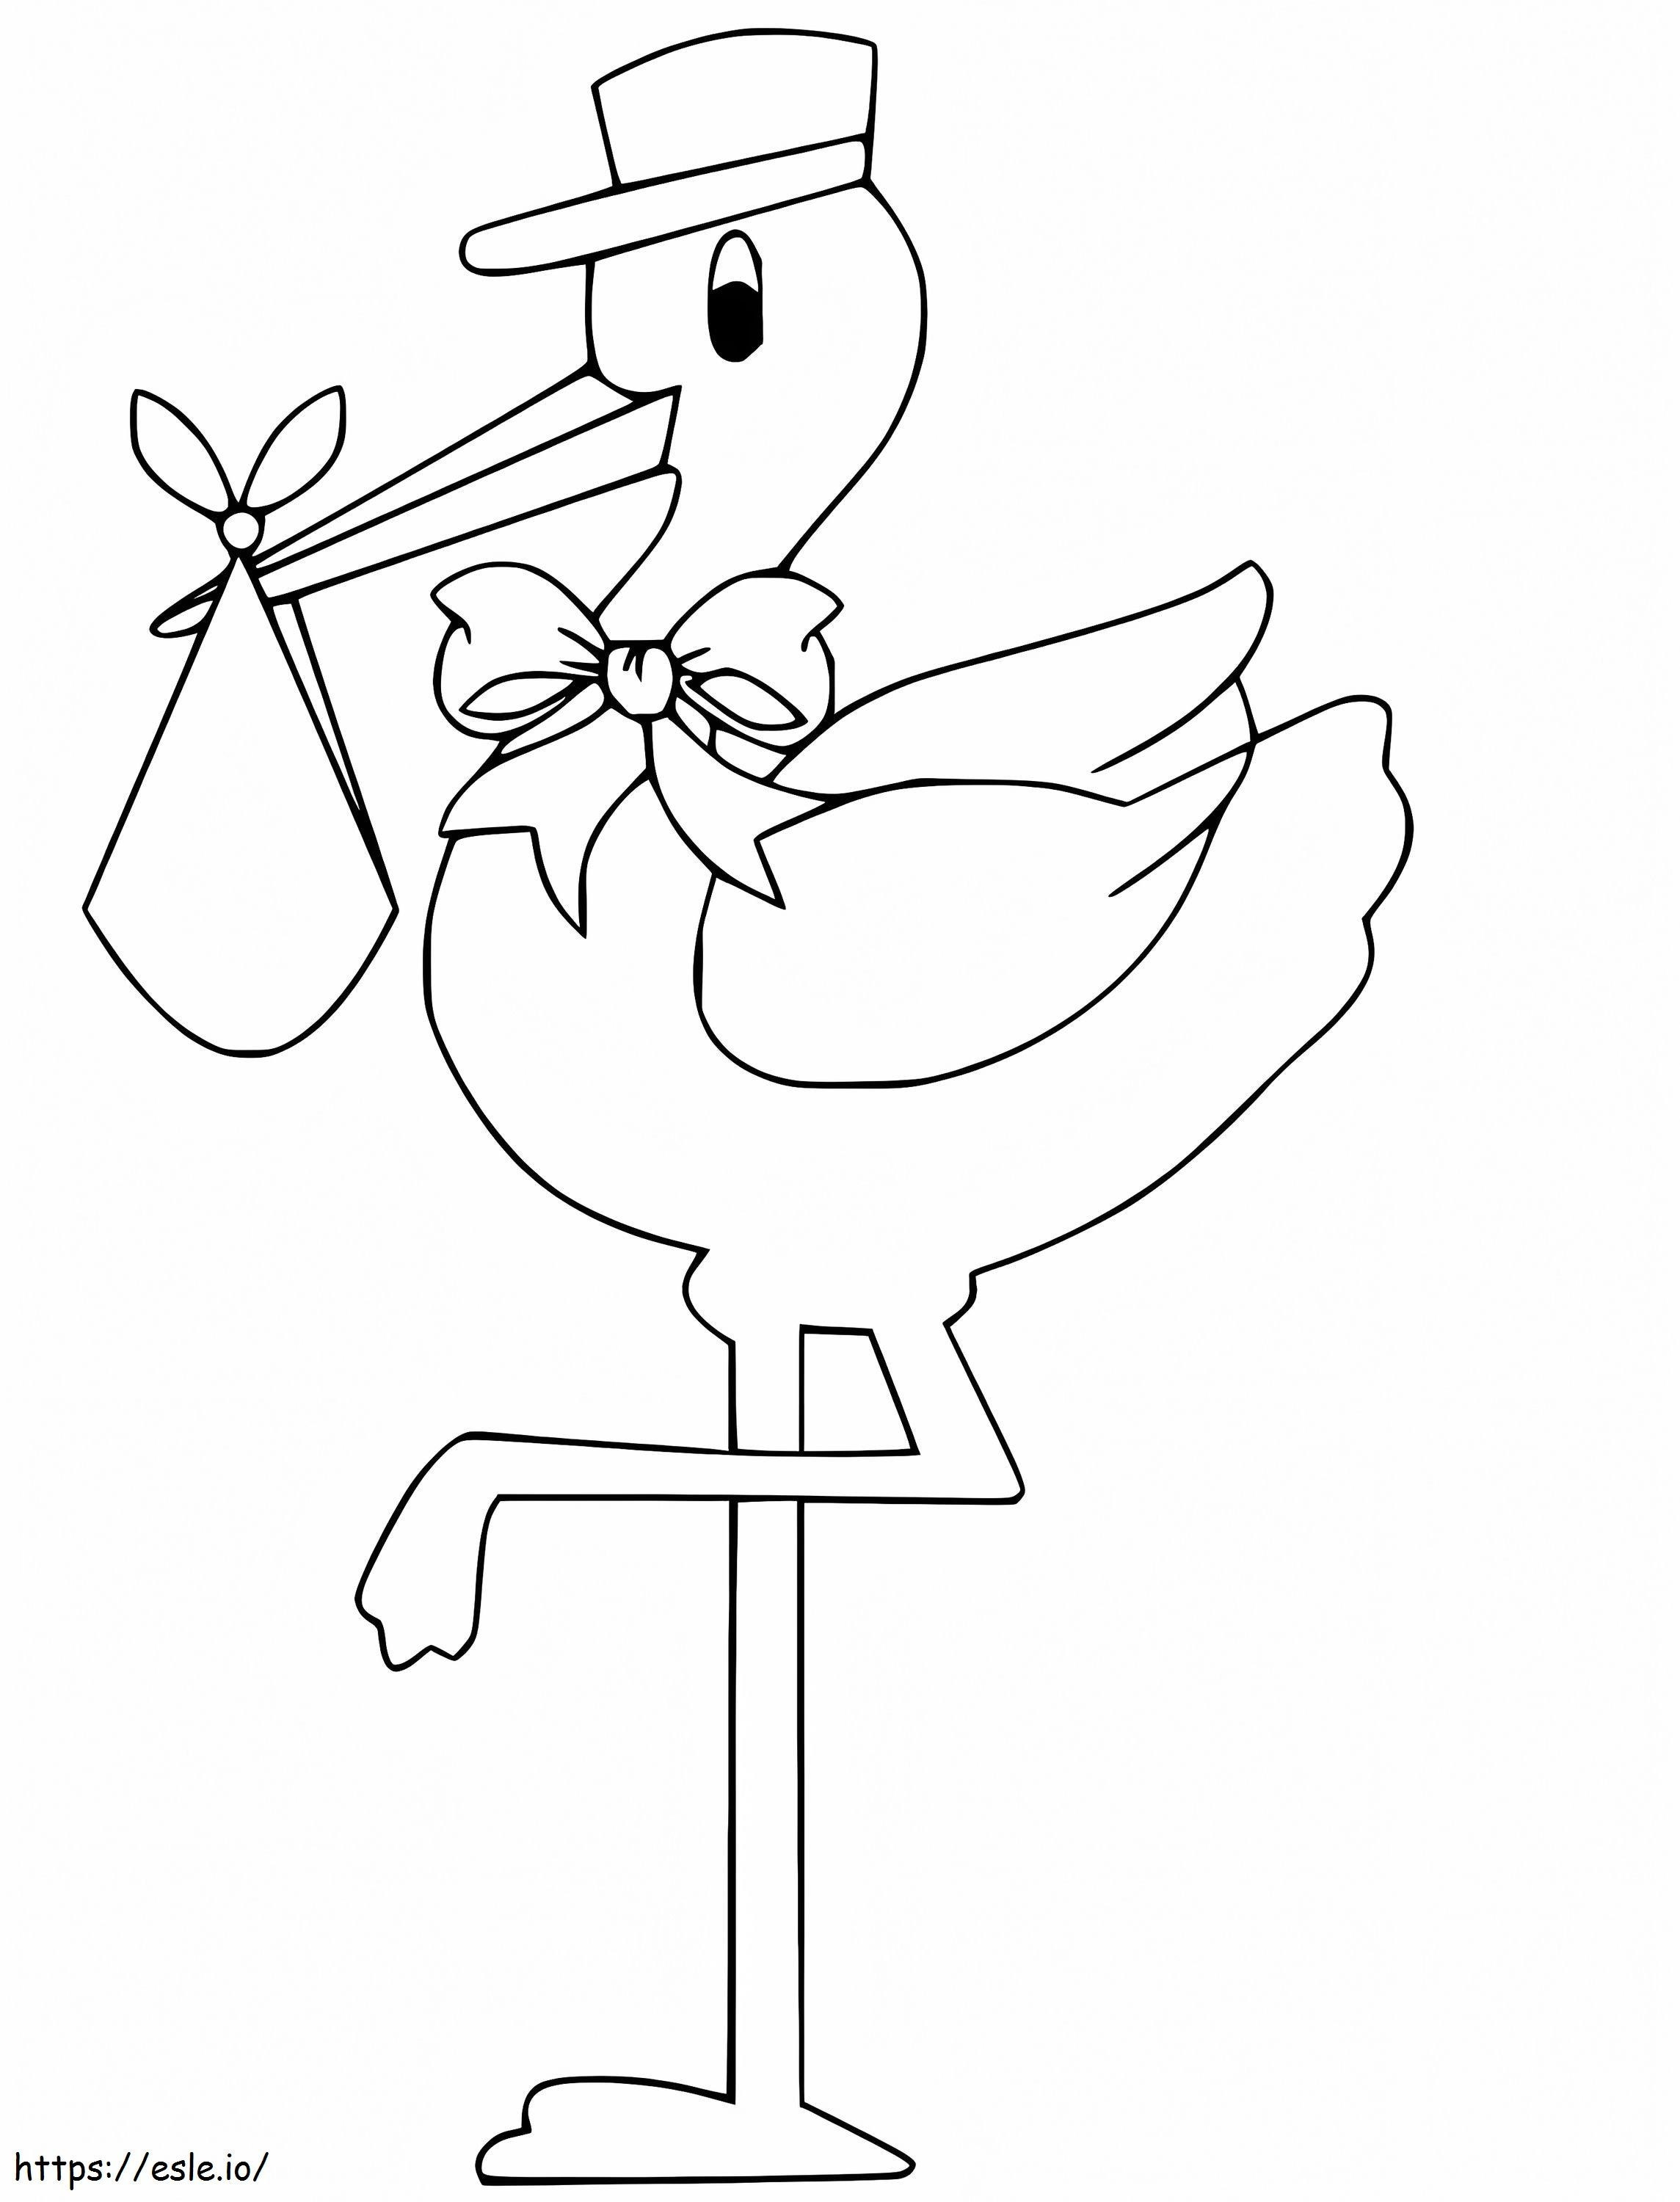 A Cute Stork coloring page